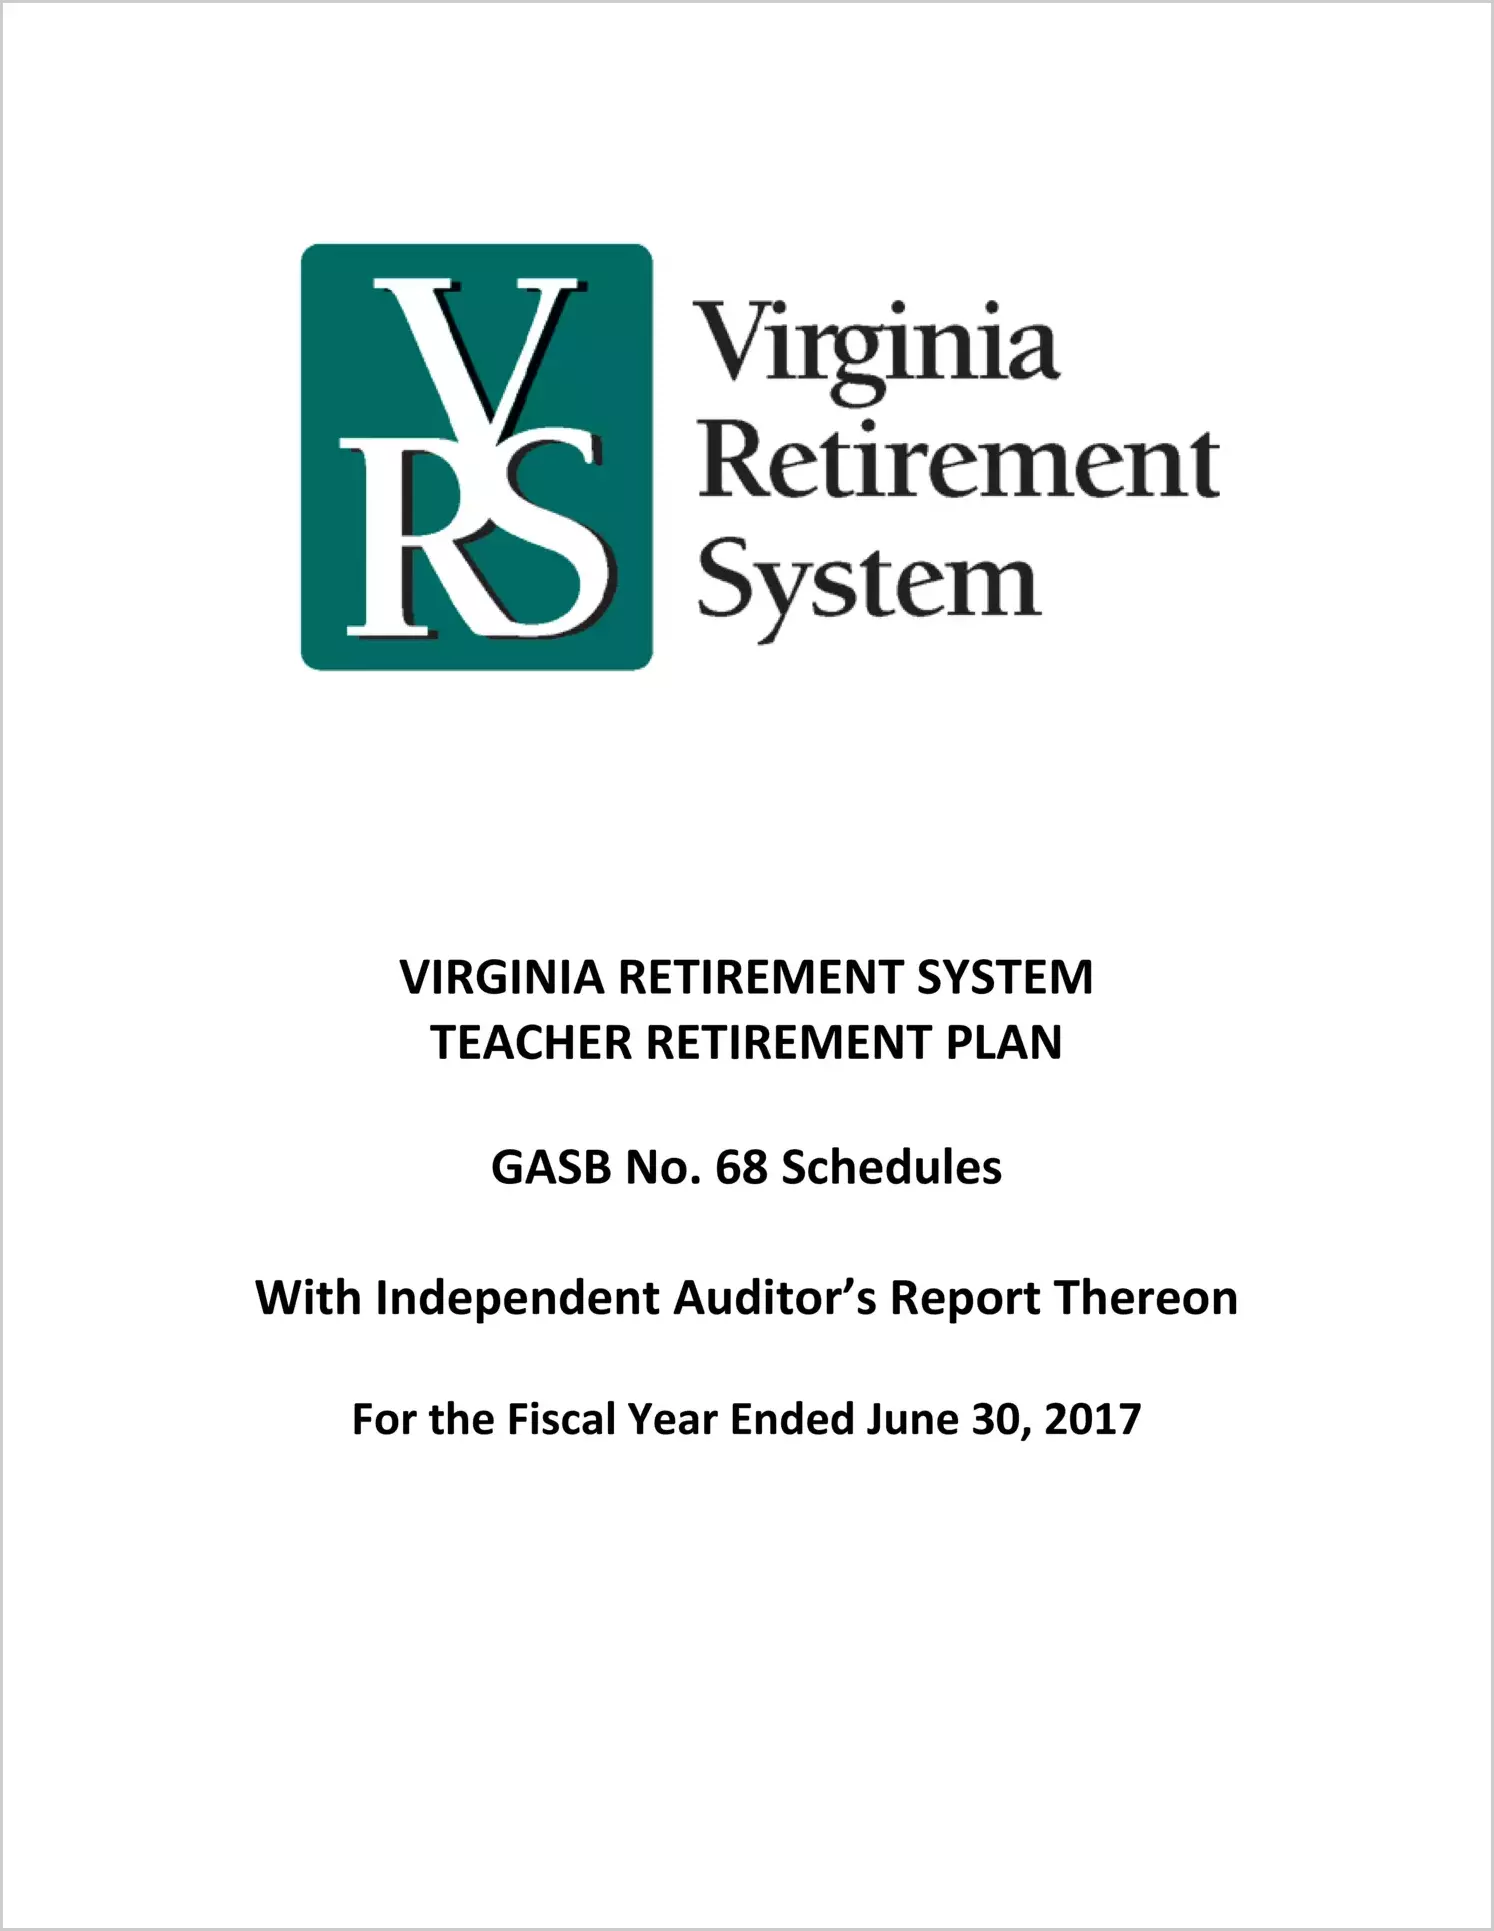 GASB 68 Schedule - Teacher Retirement Plan for the fiscal year June 30, 2017